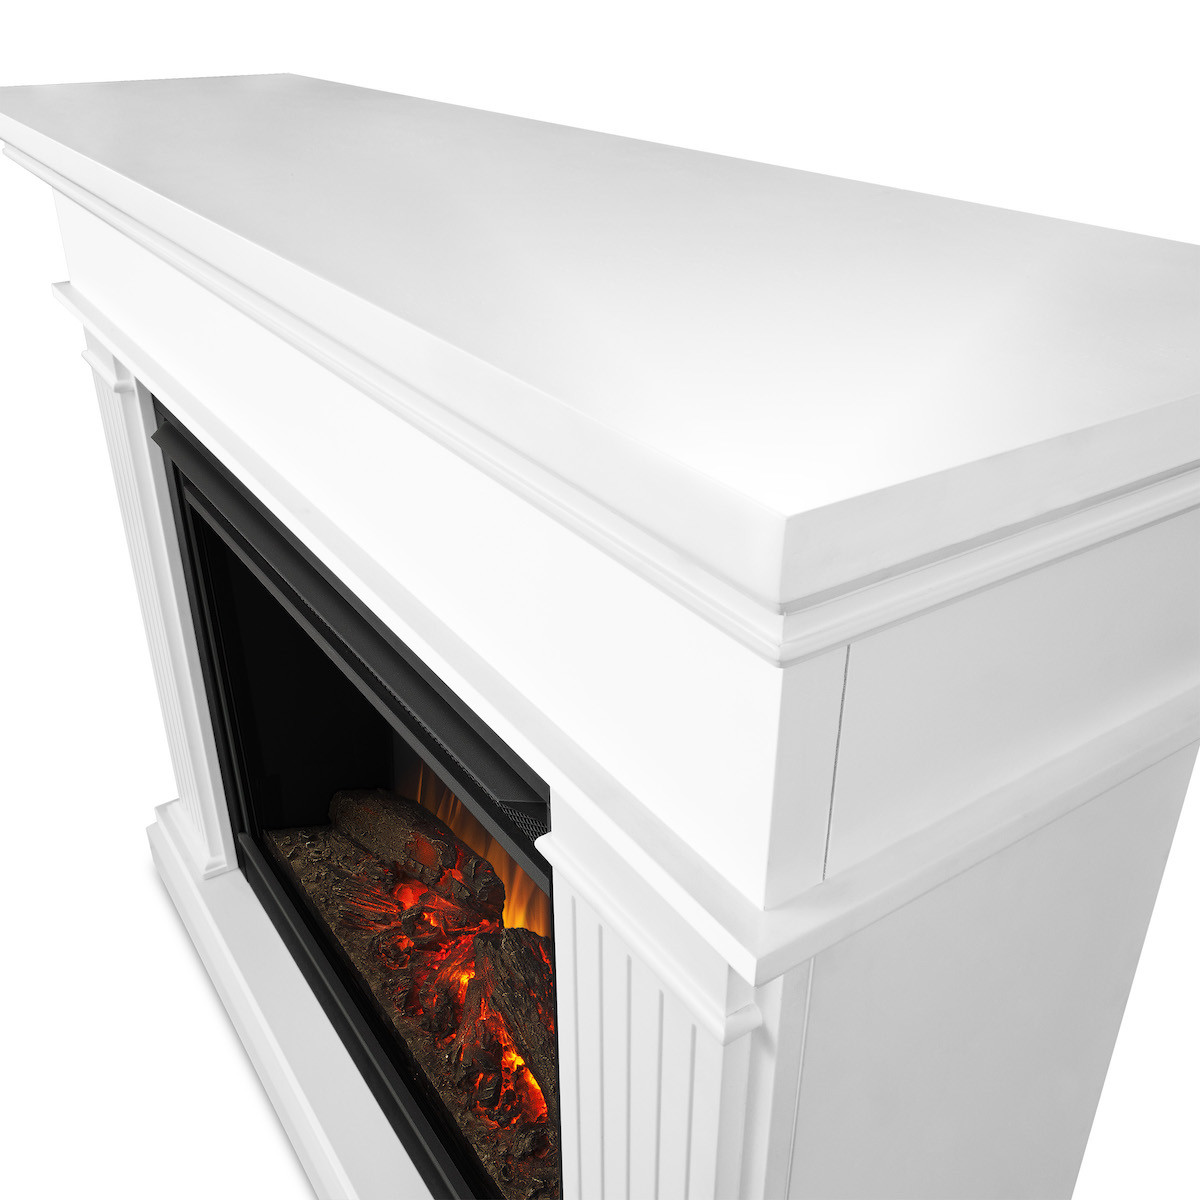 Grand White Electric Fireplace
 Real Flame Kennedy Grand Electric Fireplace in White